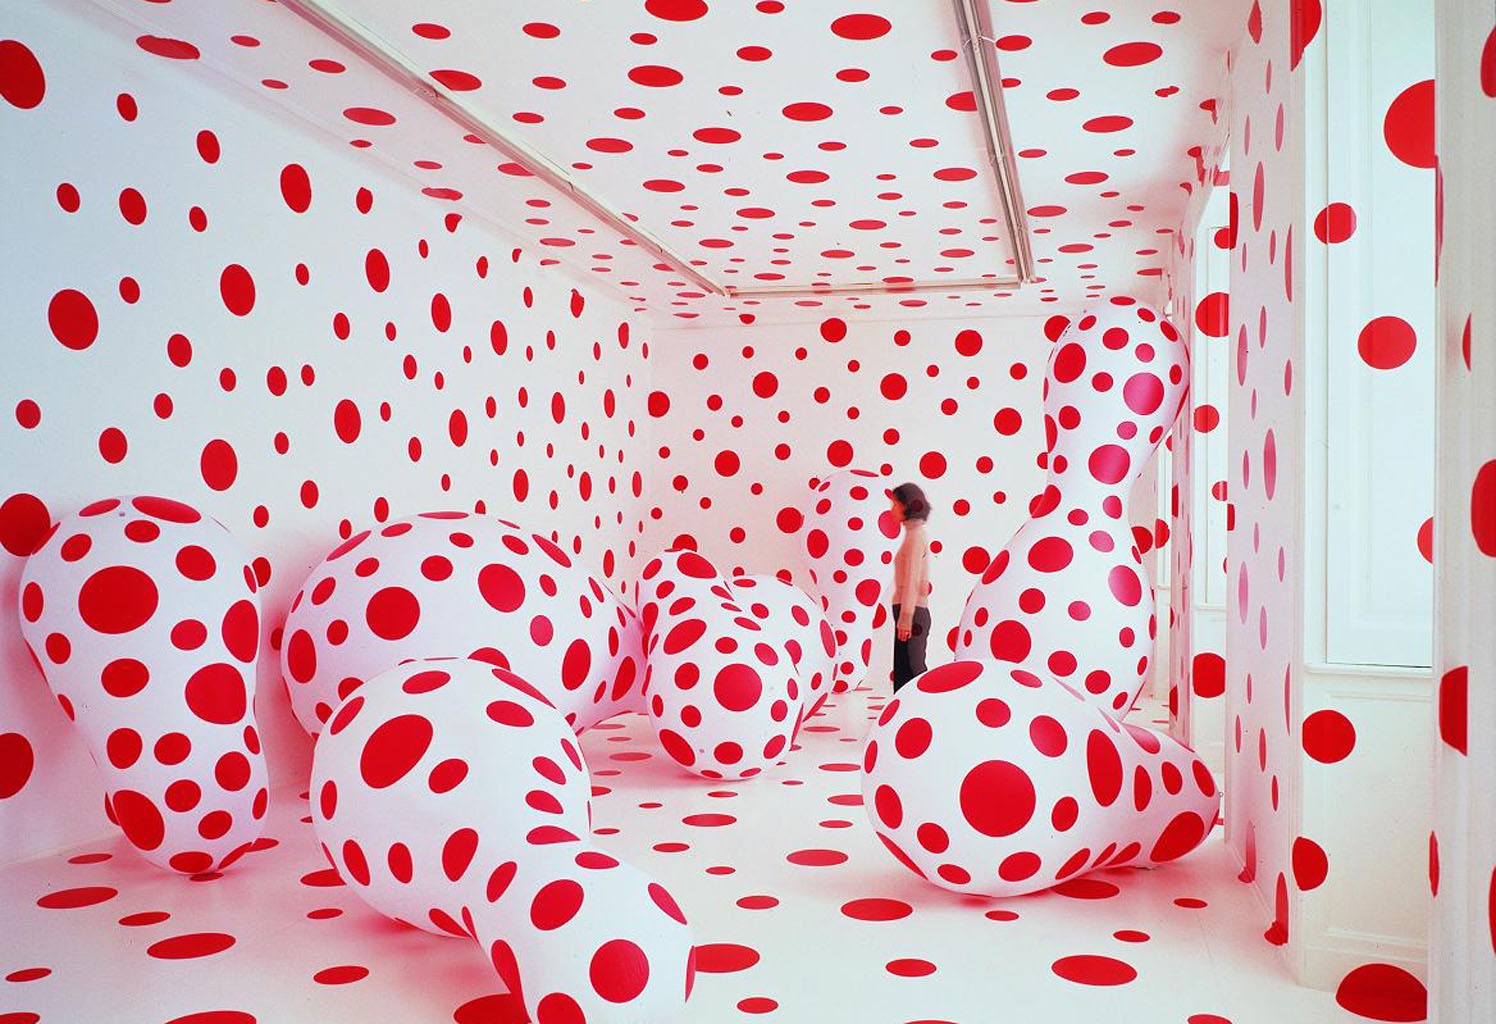 louis-vuitton-yayoi-kusama-marcel-batlle-design-sport-canalxtremo-web-design-phpotography-graphic-design-video-art-direction-01